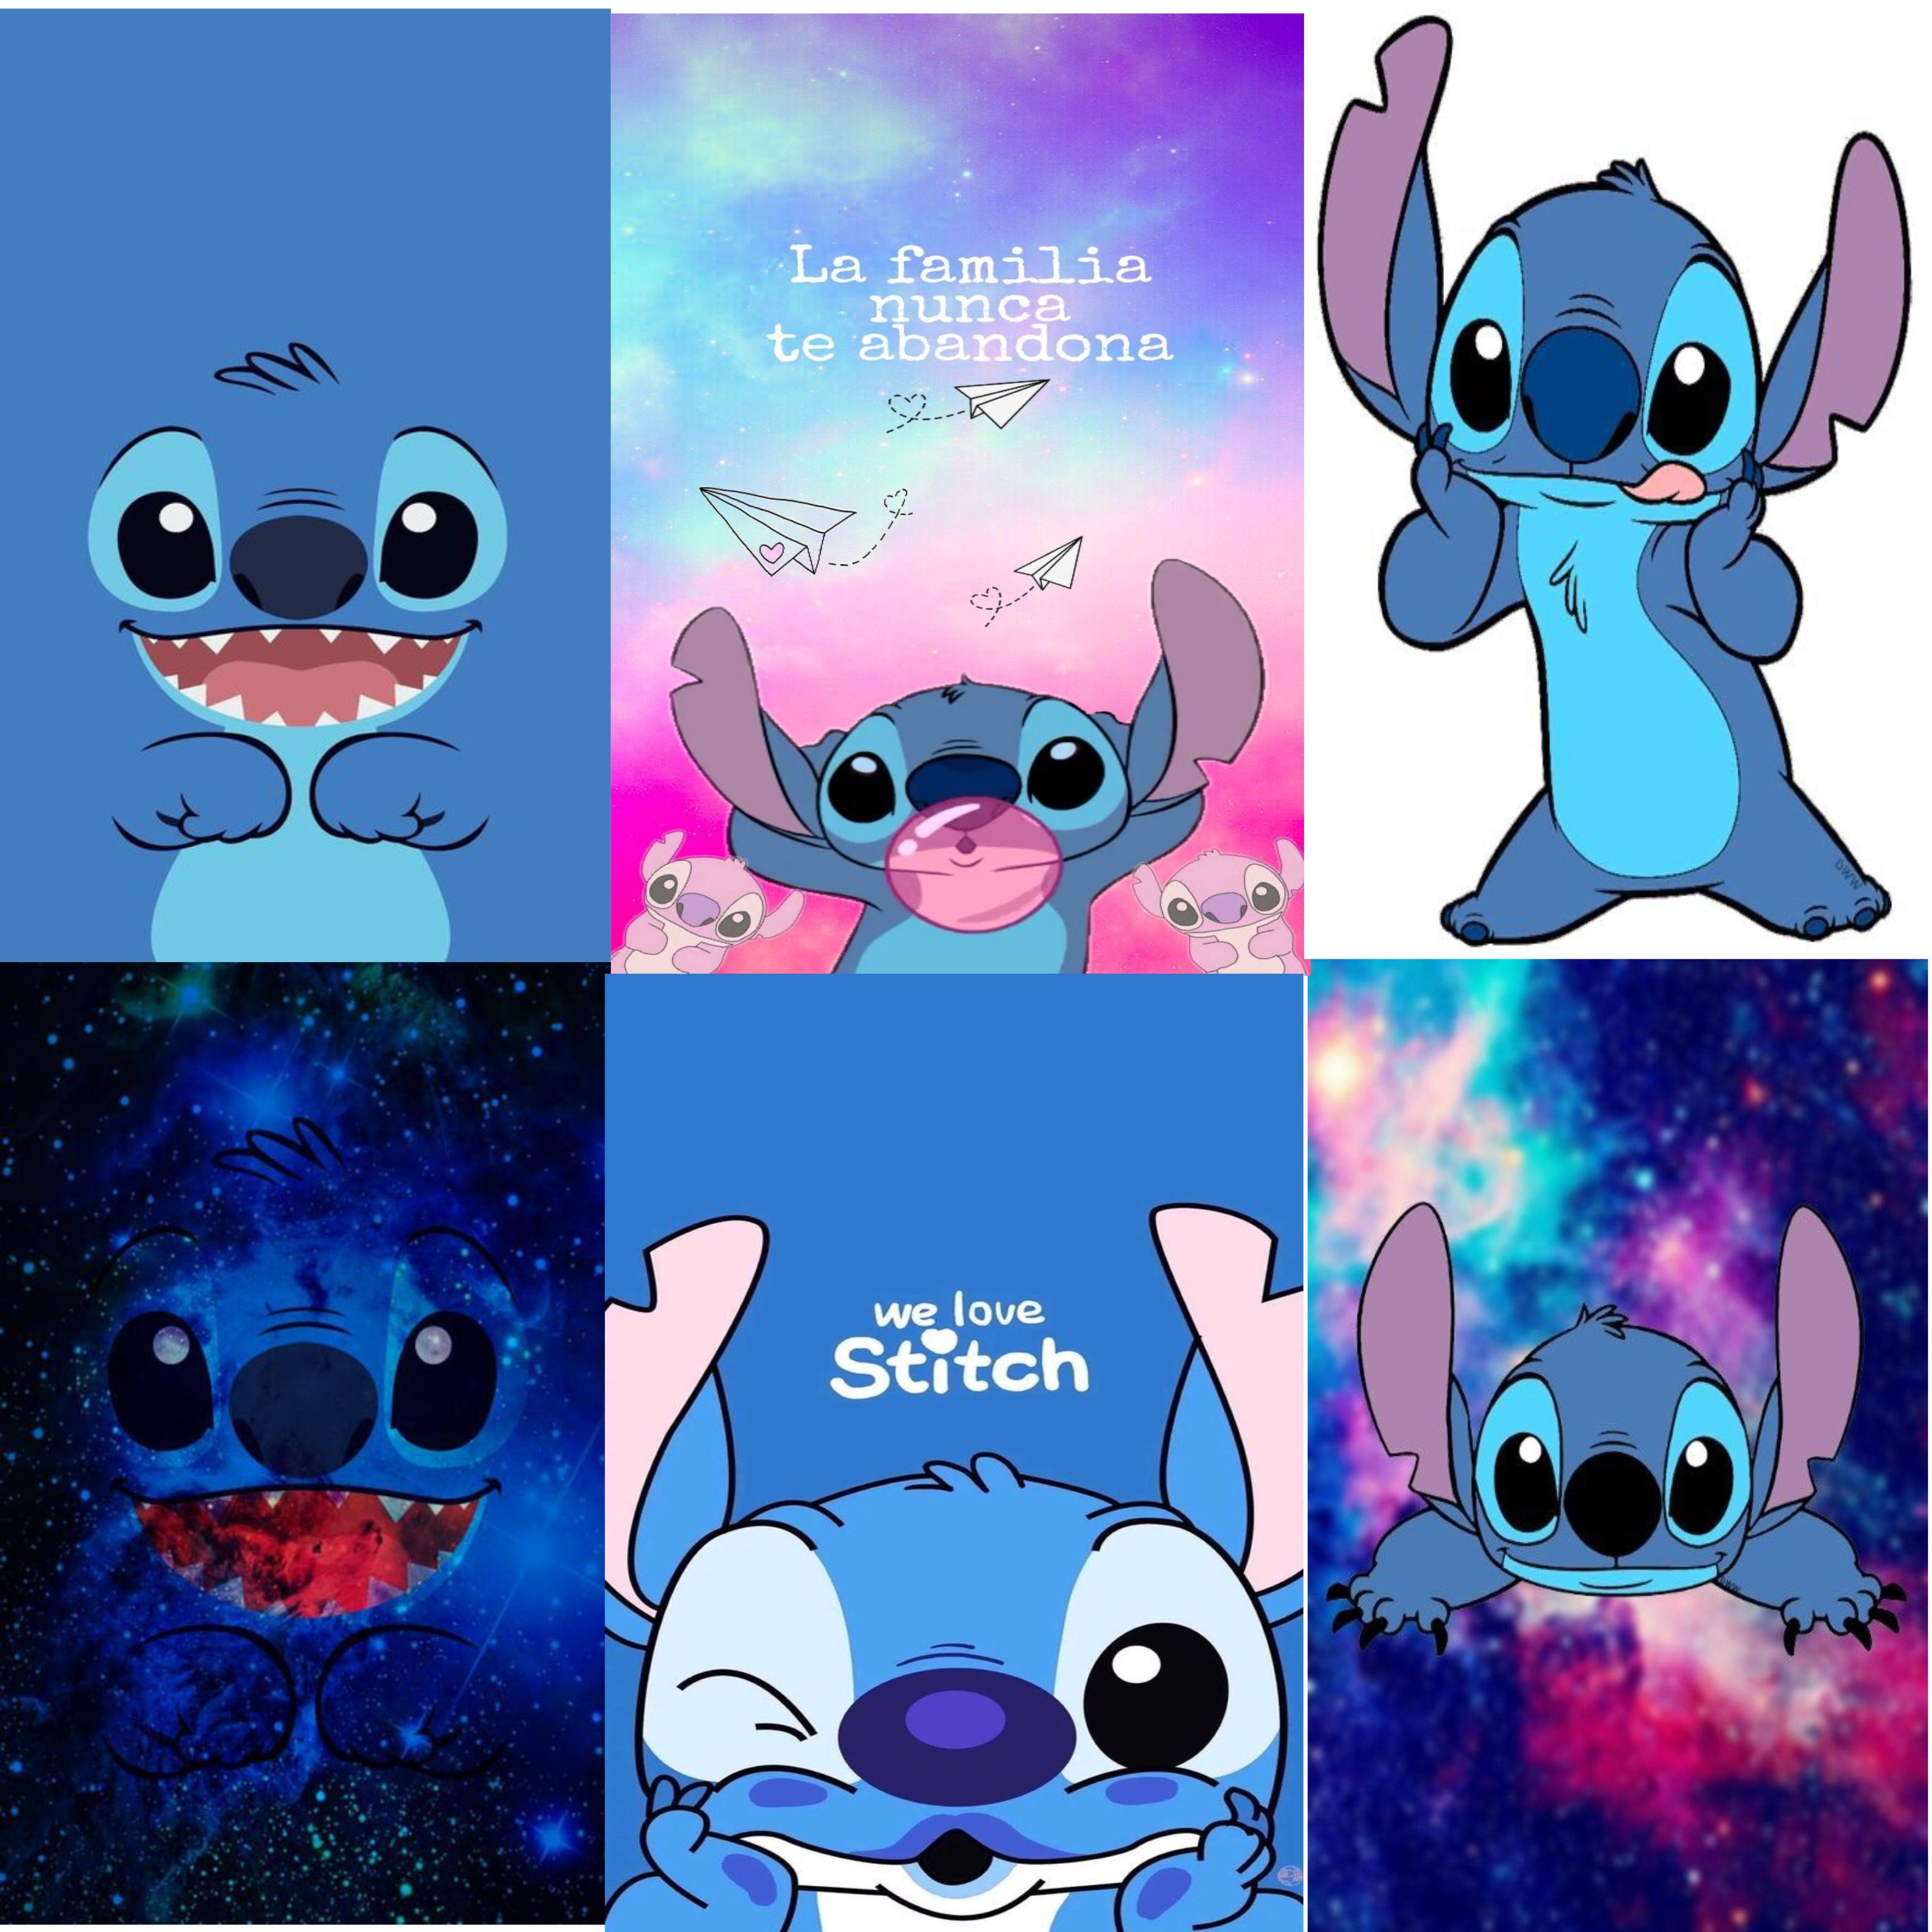 Stitch and lilo & 10 other disney characters in space - Stitch